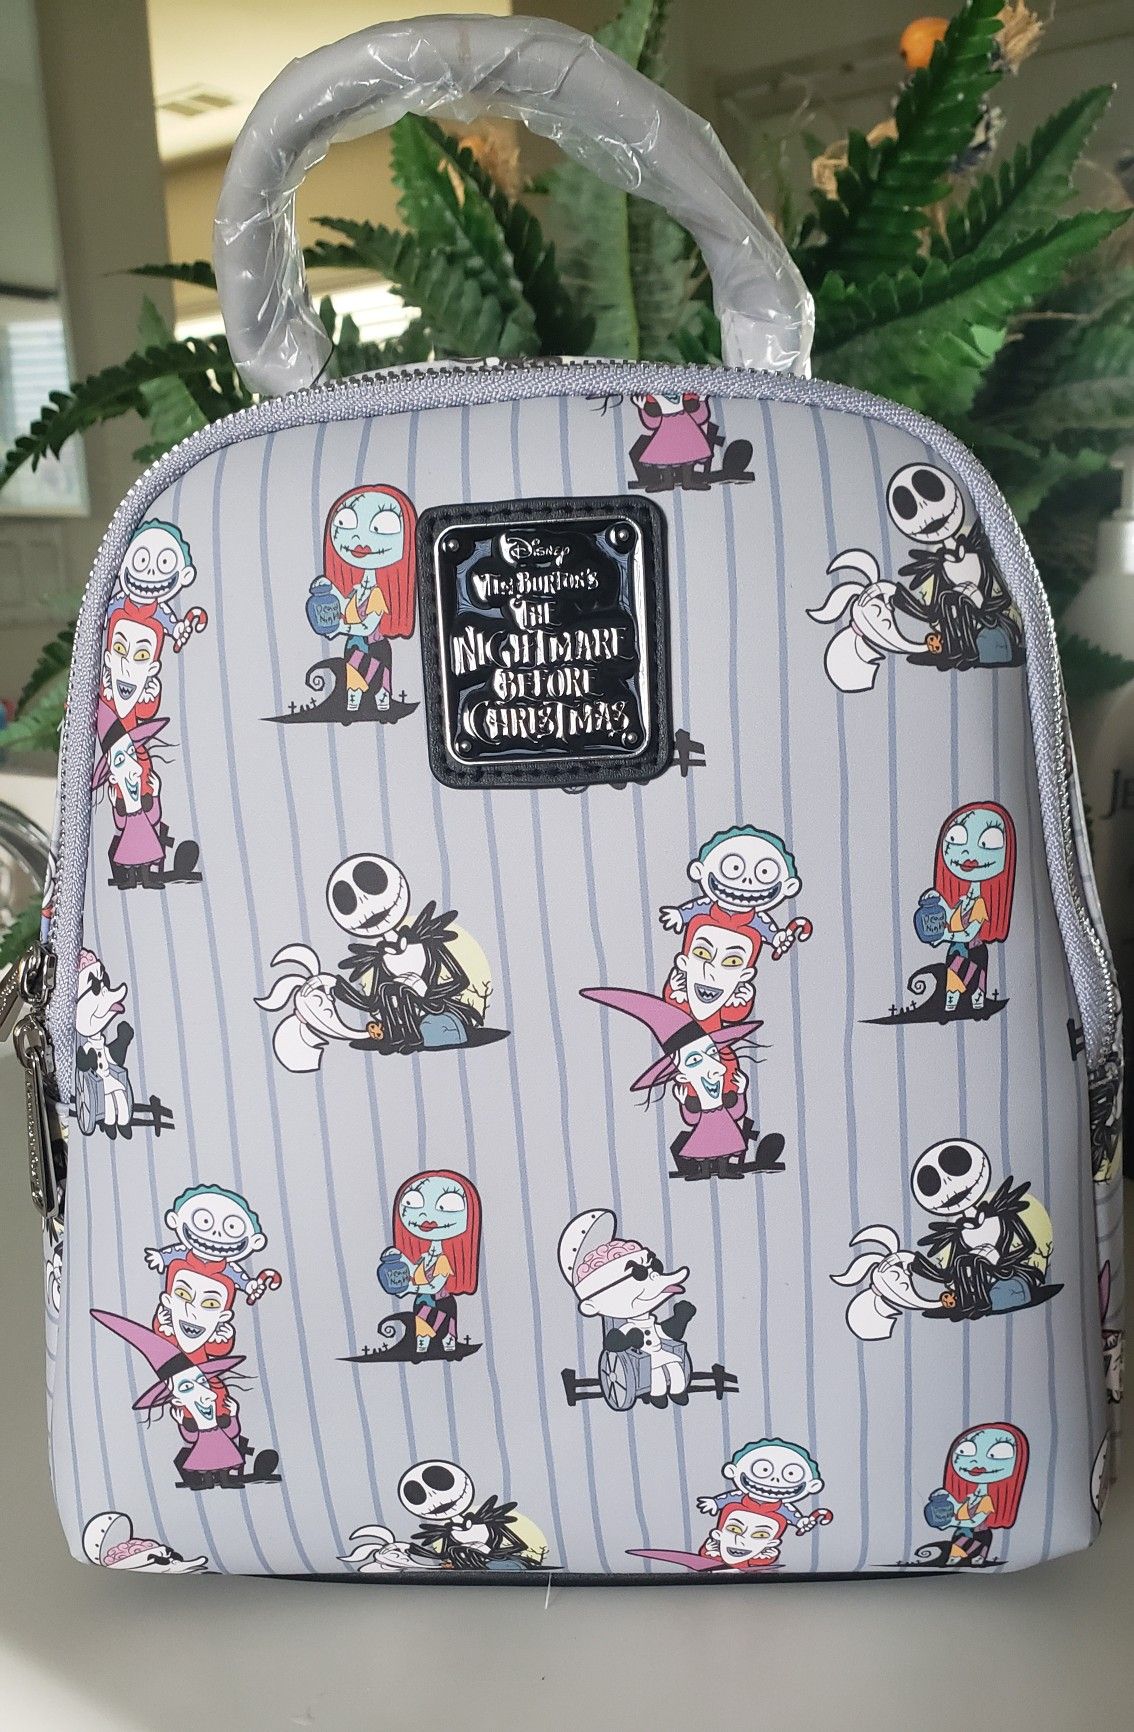 Black Friday Blowout! Loungefly Nightmare Before Christmas backpack